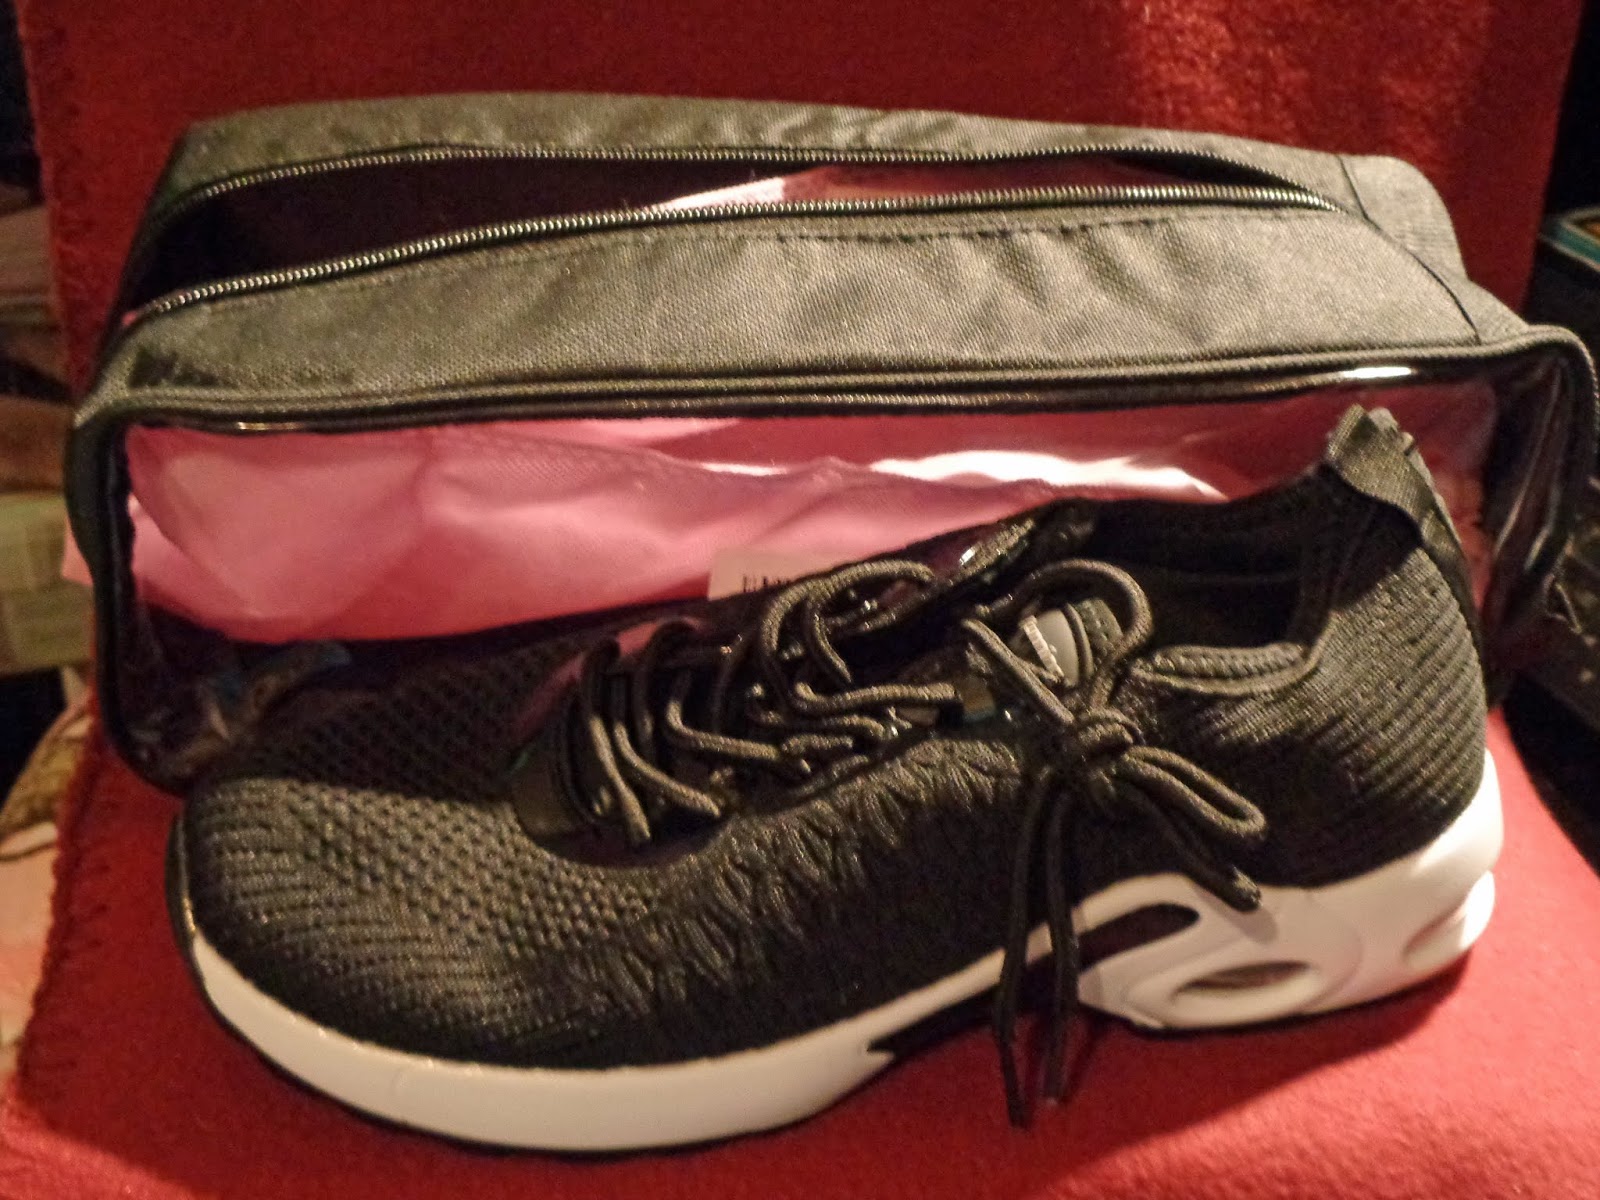 Lefty's Product Review's: MEHOTO Lightweight Slip on Air Running Shoes